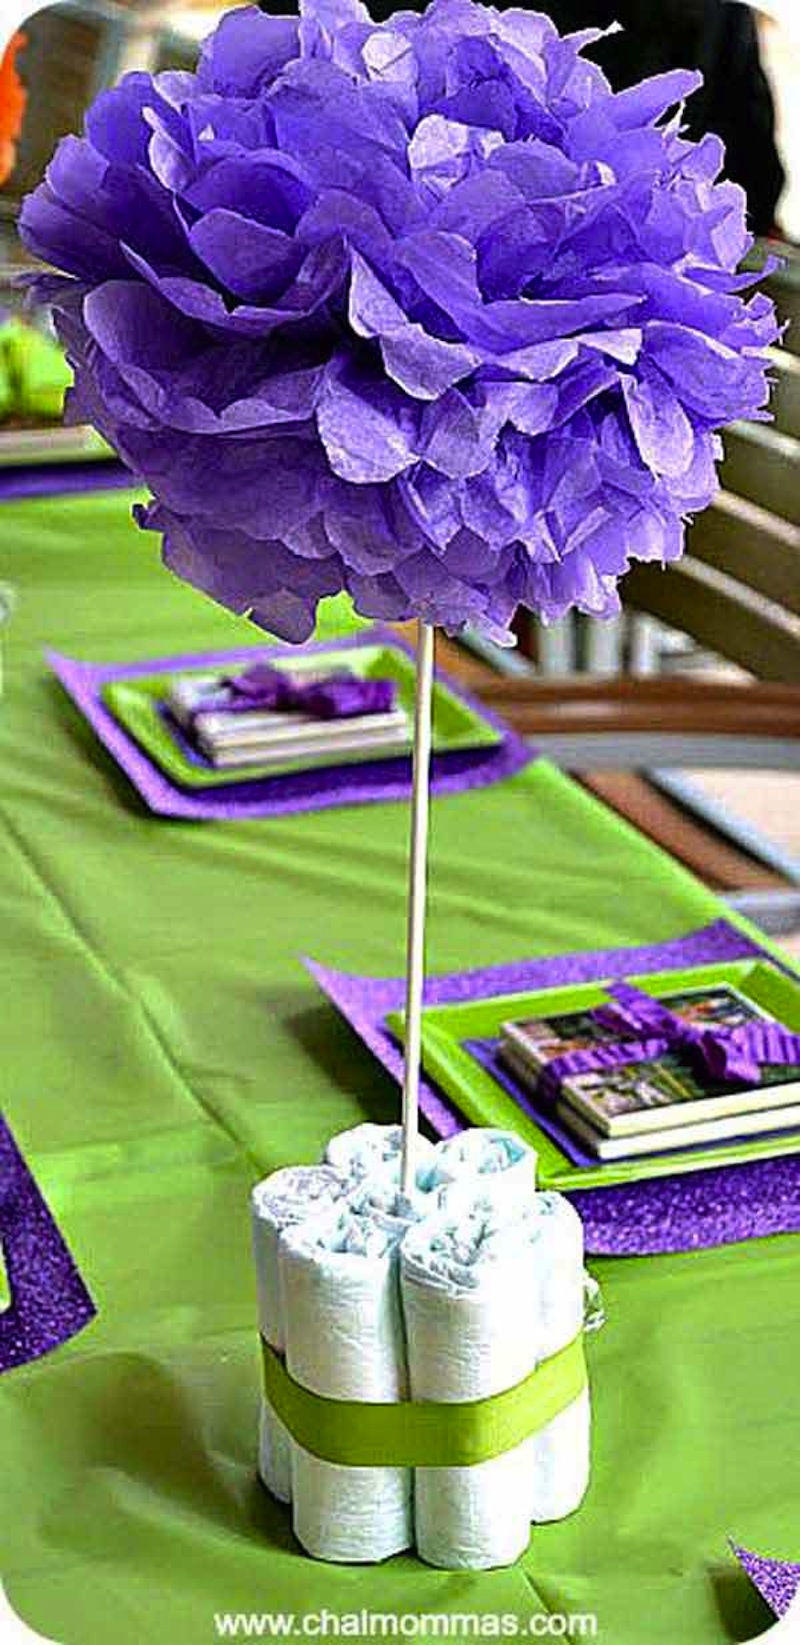 Tissue paper flower with a diaper "vase"